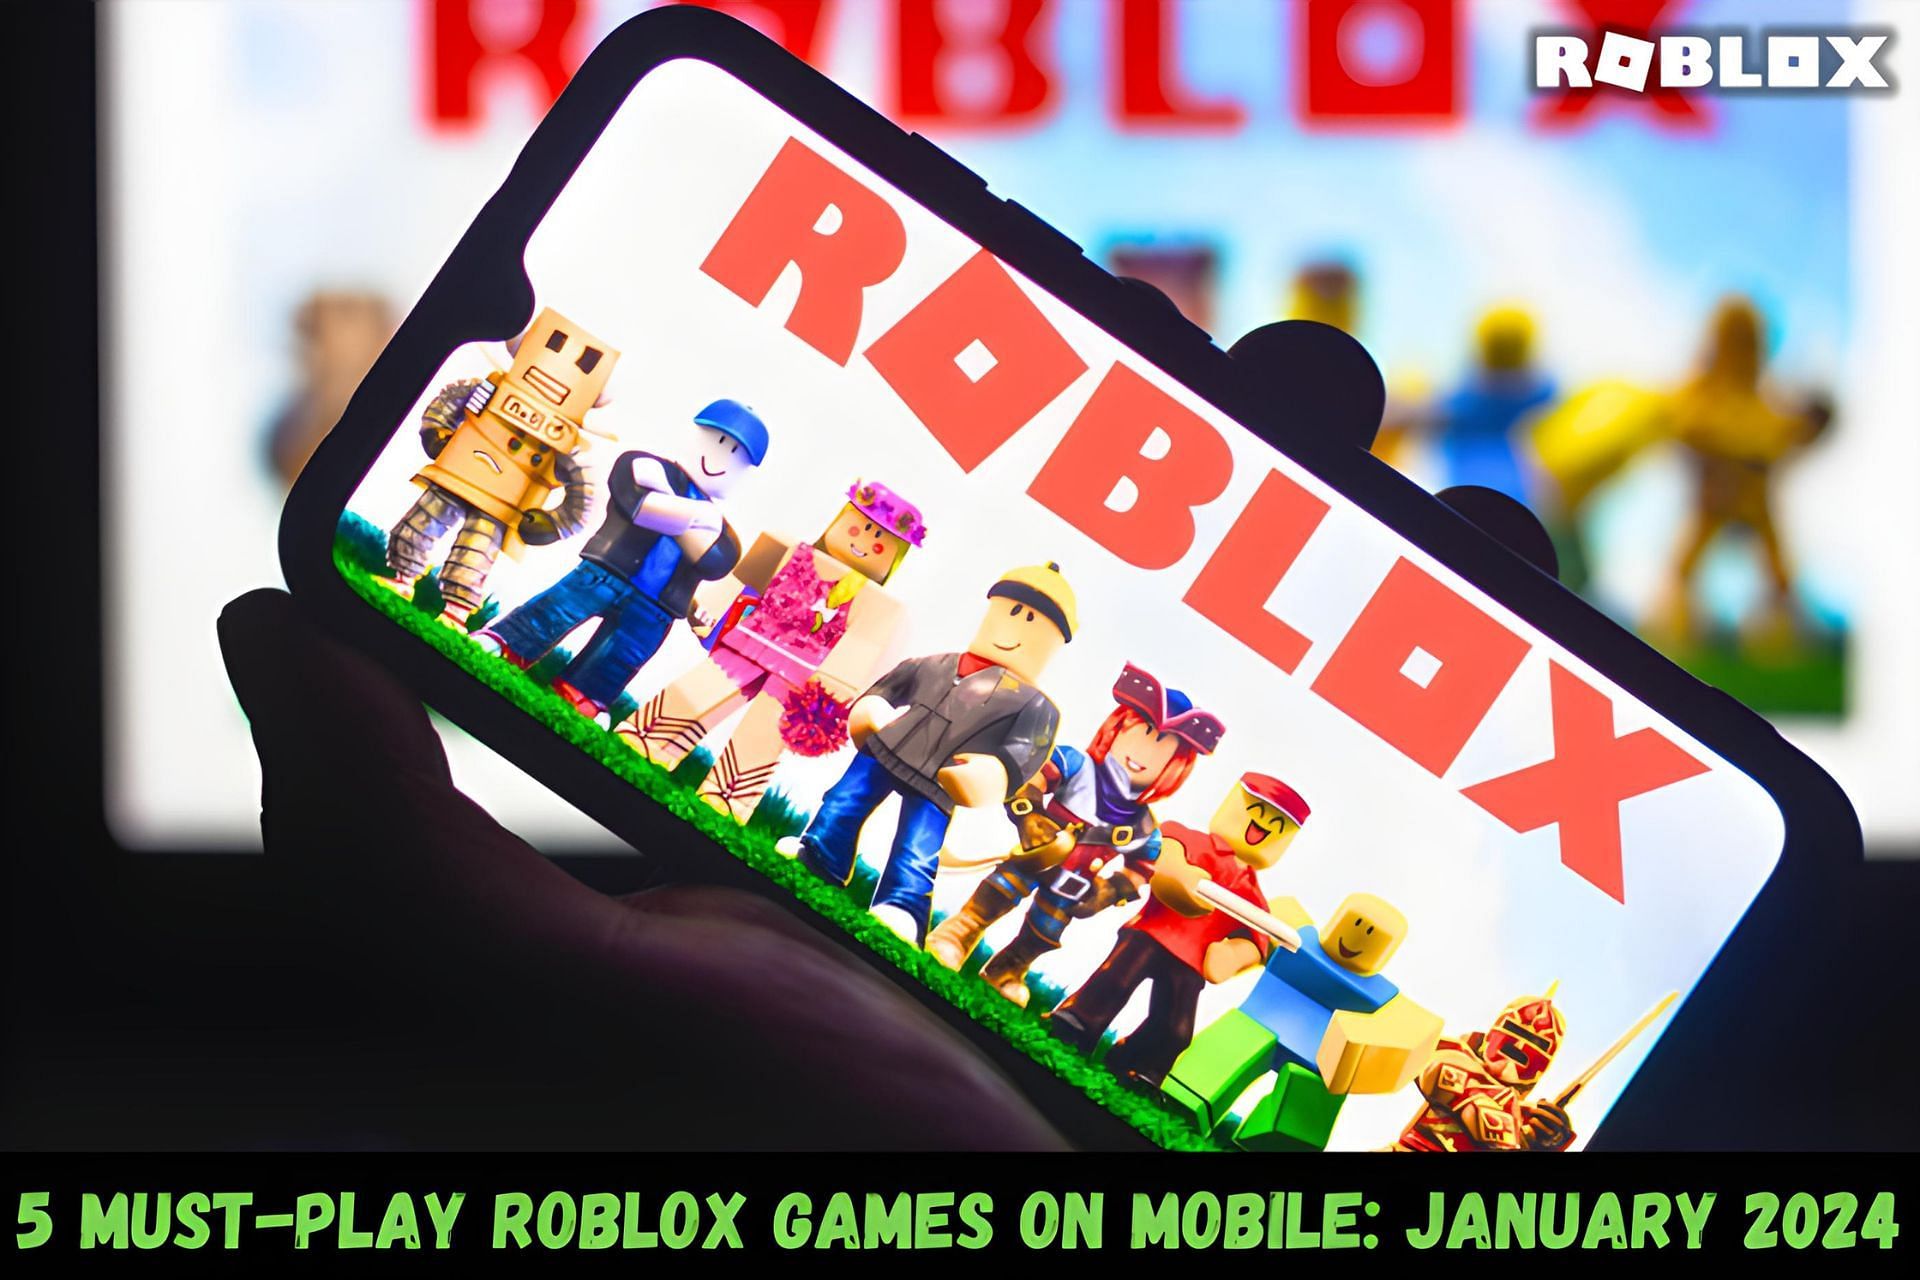 5 must-play Roblox games on mobile: January 2024